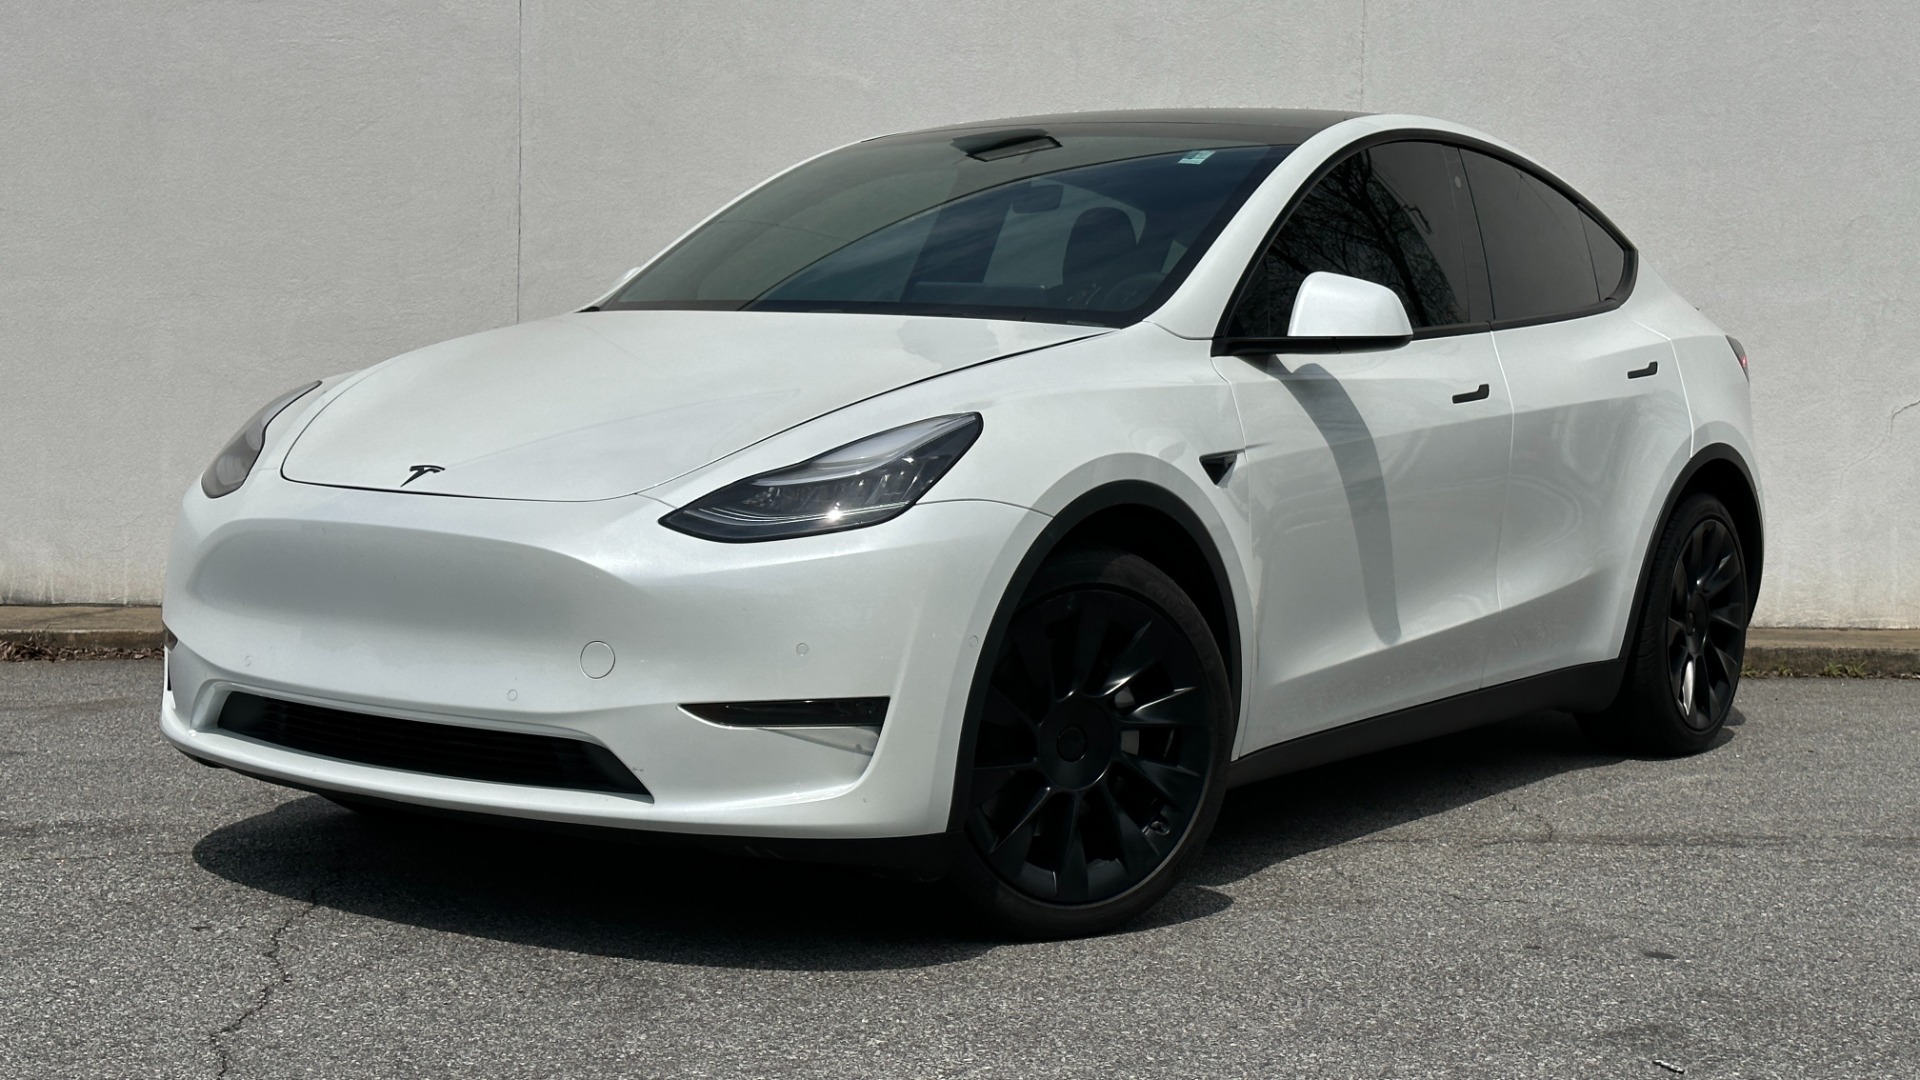 Used 2020 Tesla MODEL Y LONG RANGE ACCELERATION BOOST / AUTOPILOT / STANDARD CONNECTIVITY / WOOD TRIM for sale $44,495 at Formula Imports in Charlotte NC 28227 1